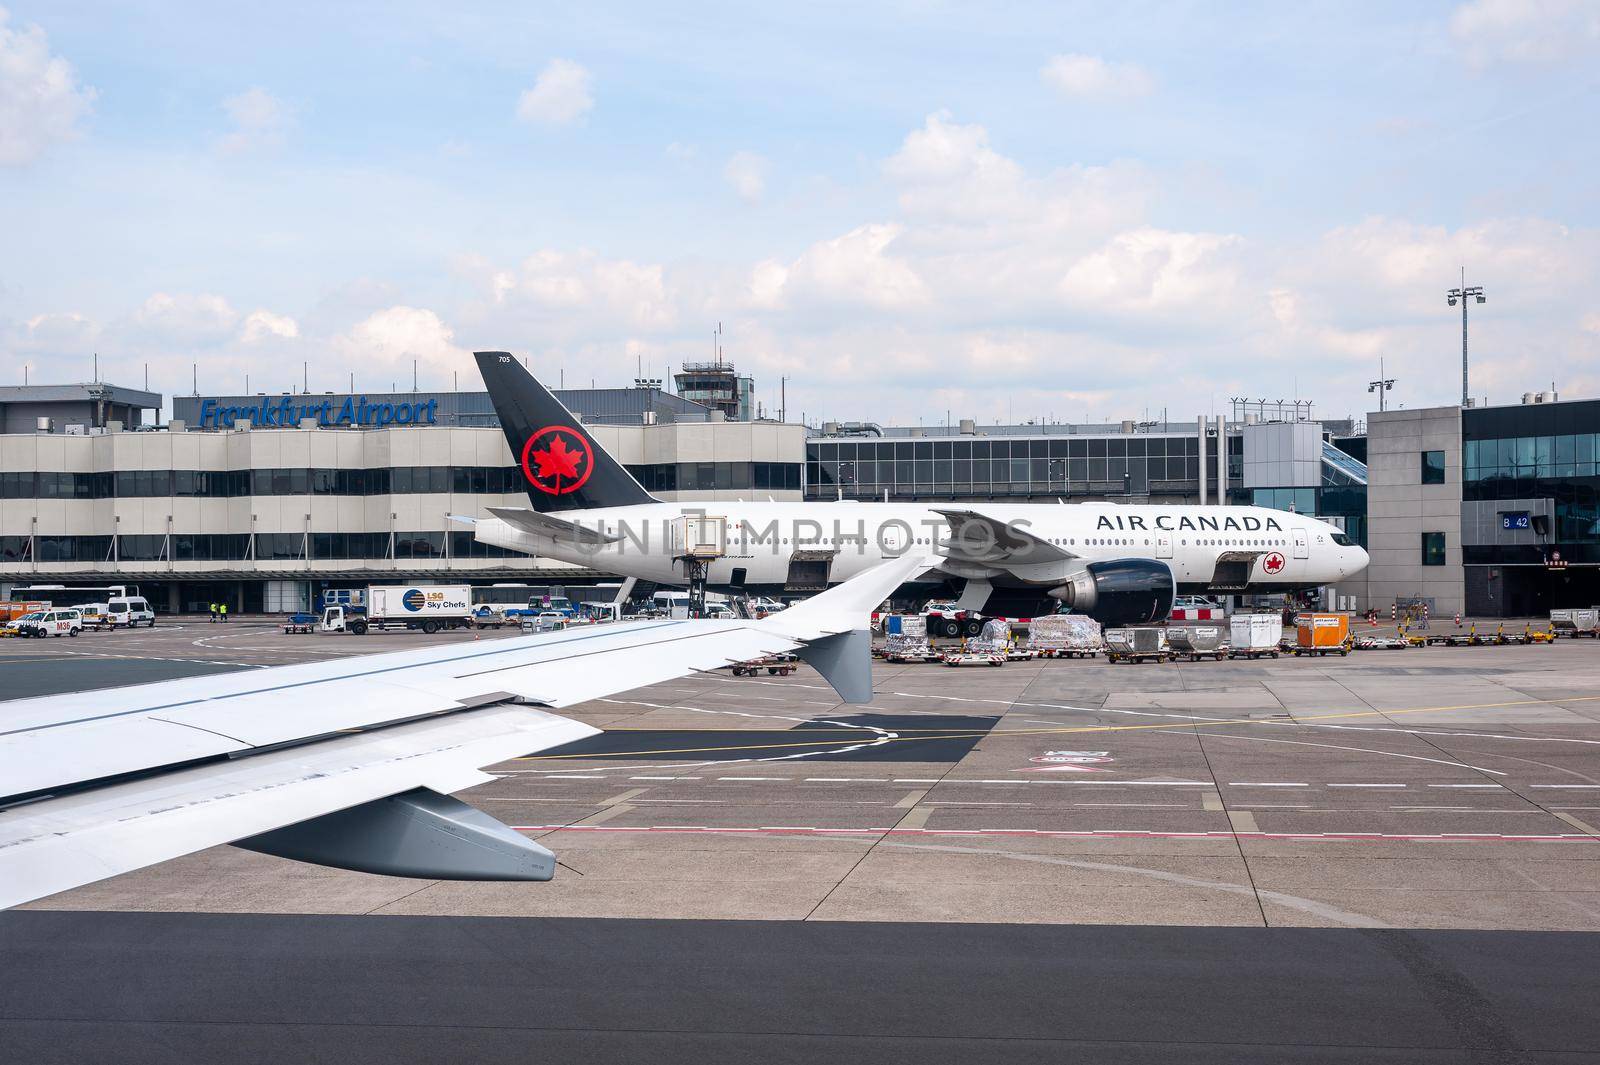 05/26/2019 Frankfurt Airport, Germany. Frankfurt Airport is the busiest airport by passenger traffic in Germany as well as the 4th busiest in Europe. Operated by Fraport and serves as the main hub for Lufthansa including Lufthansa CityLine and Lufthansa Ca by Qba